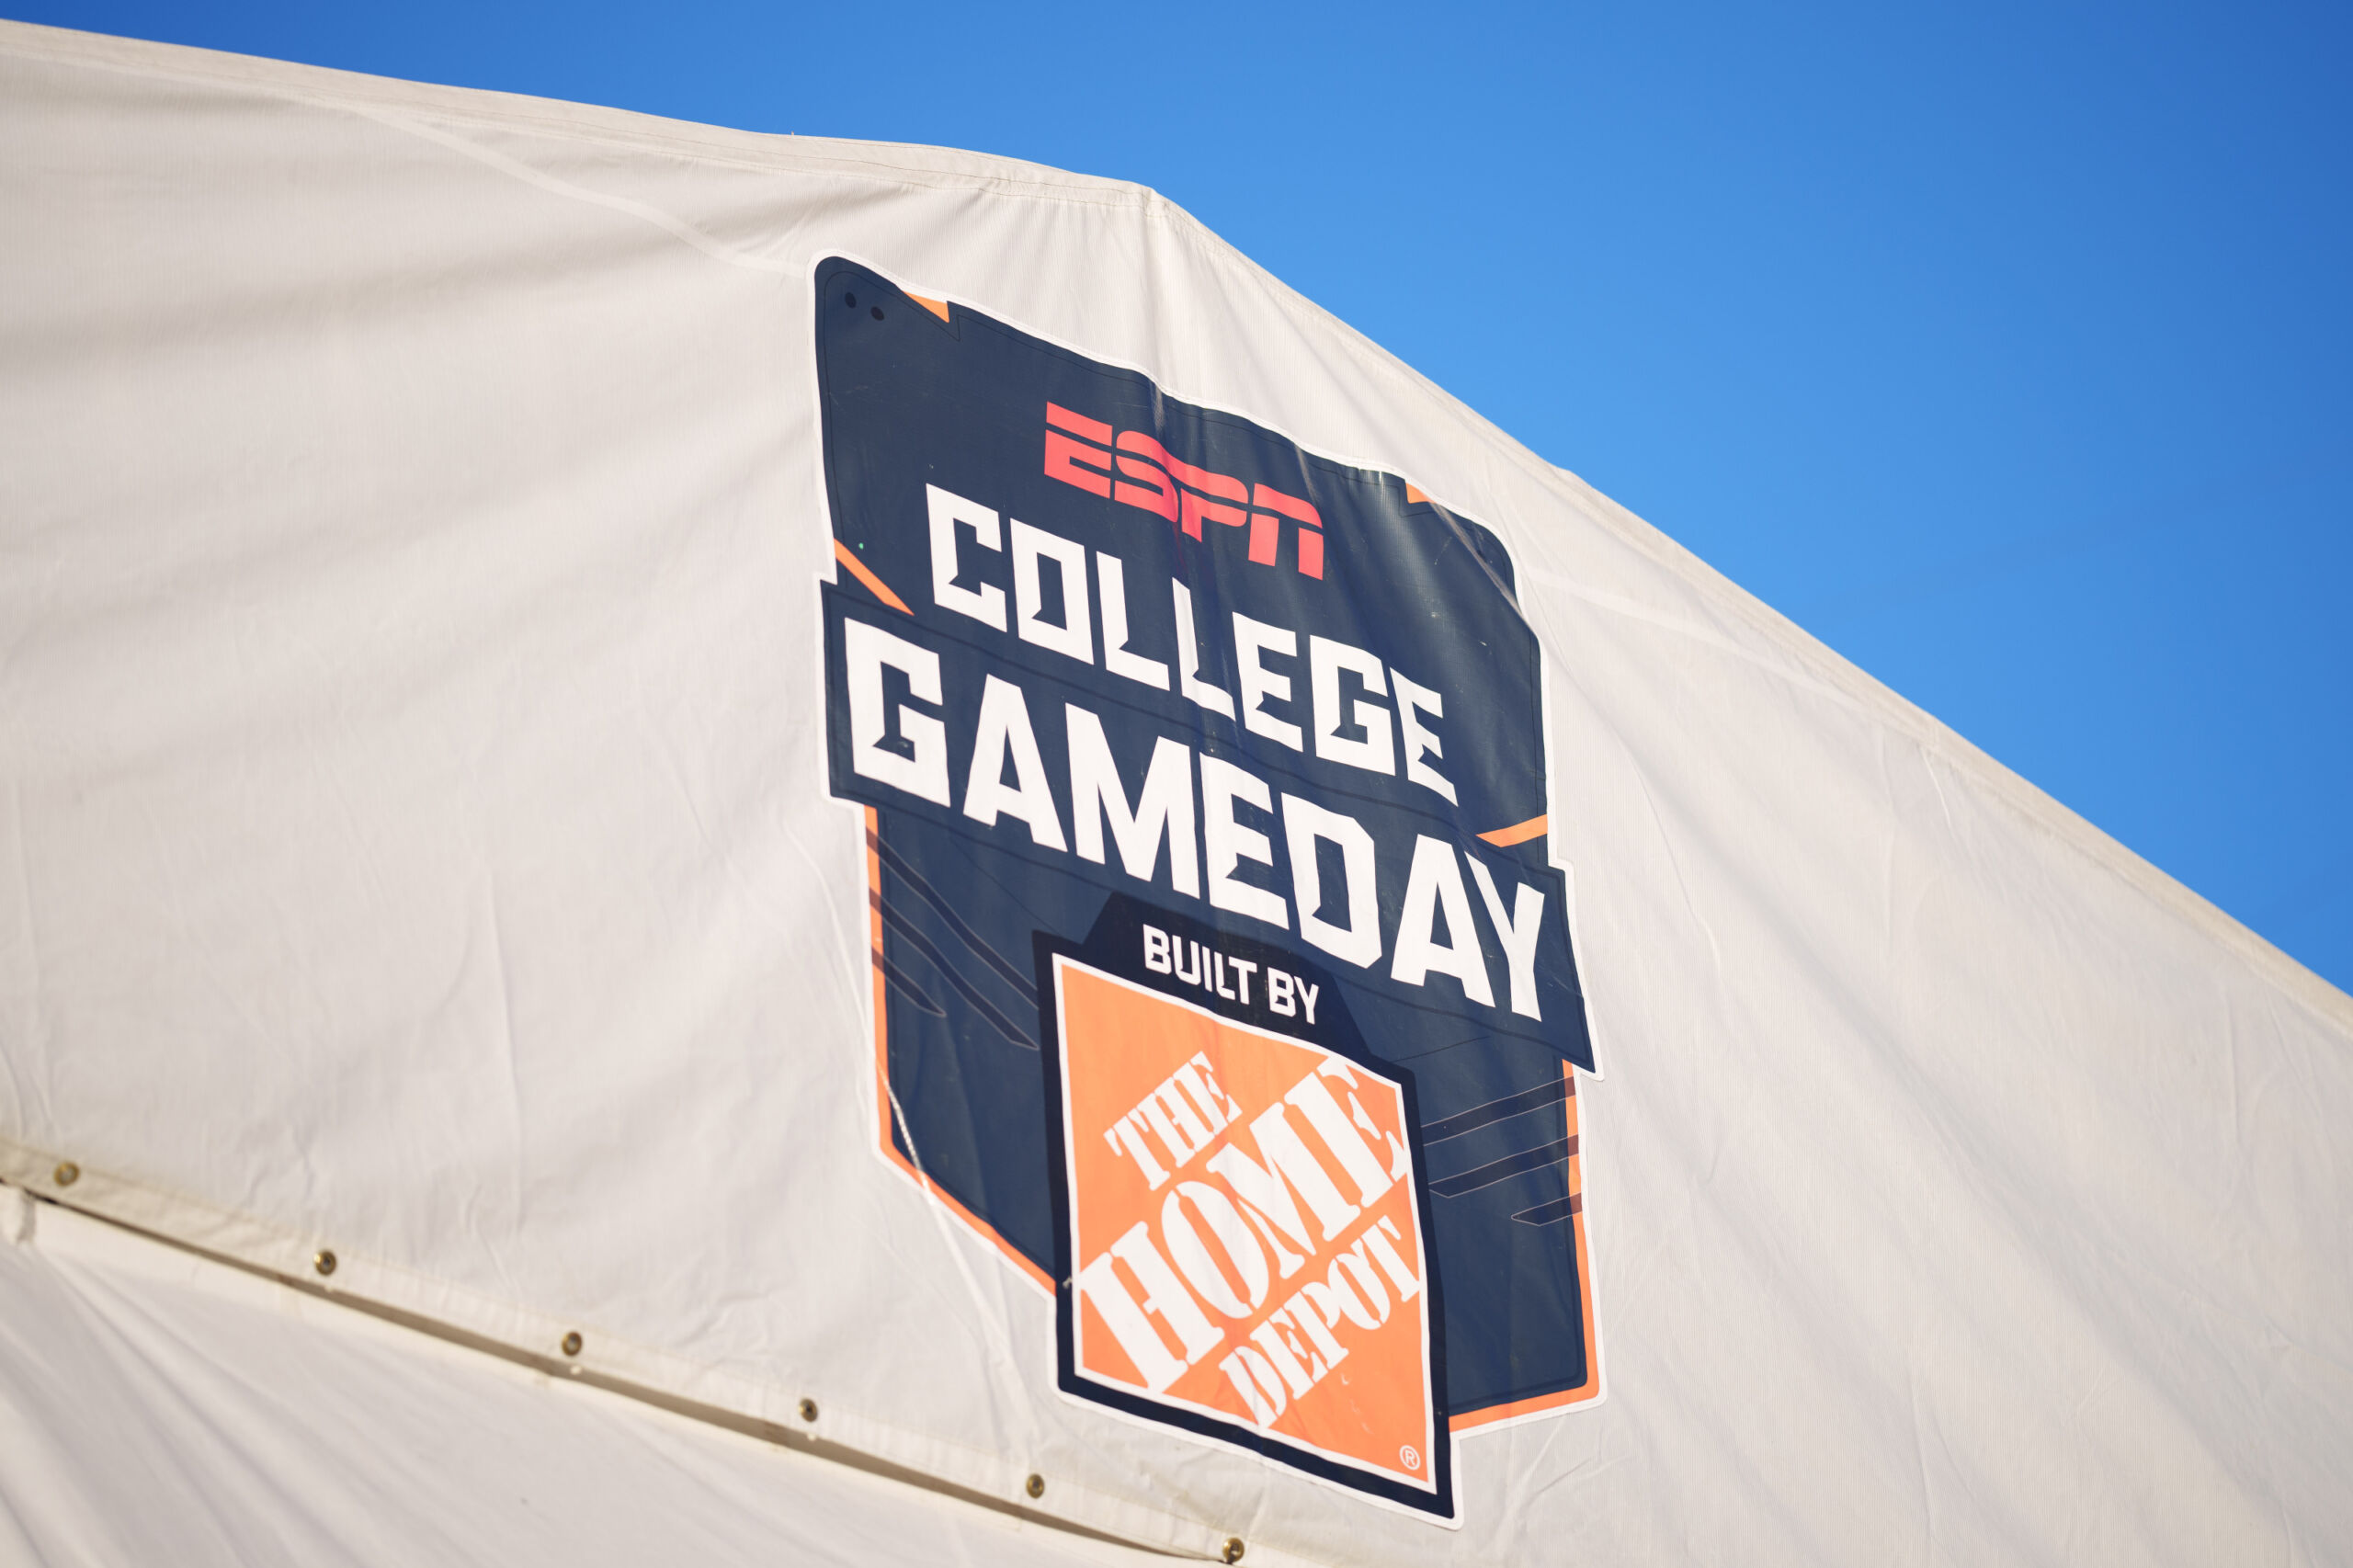 ESPN'S College GameDay Built by The Home Depot Returns for its